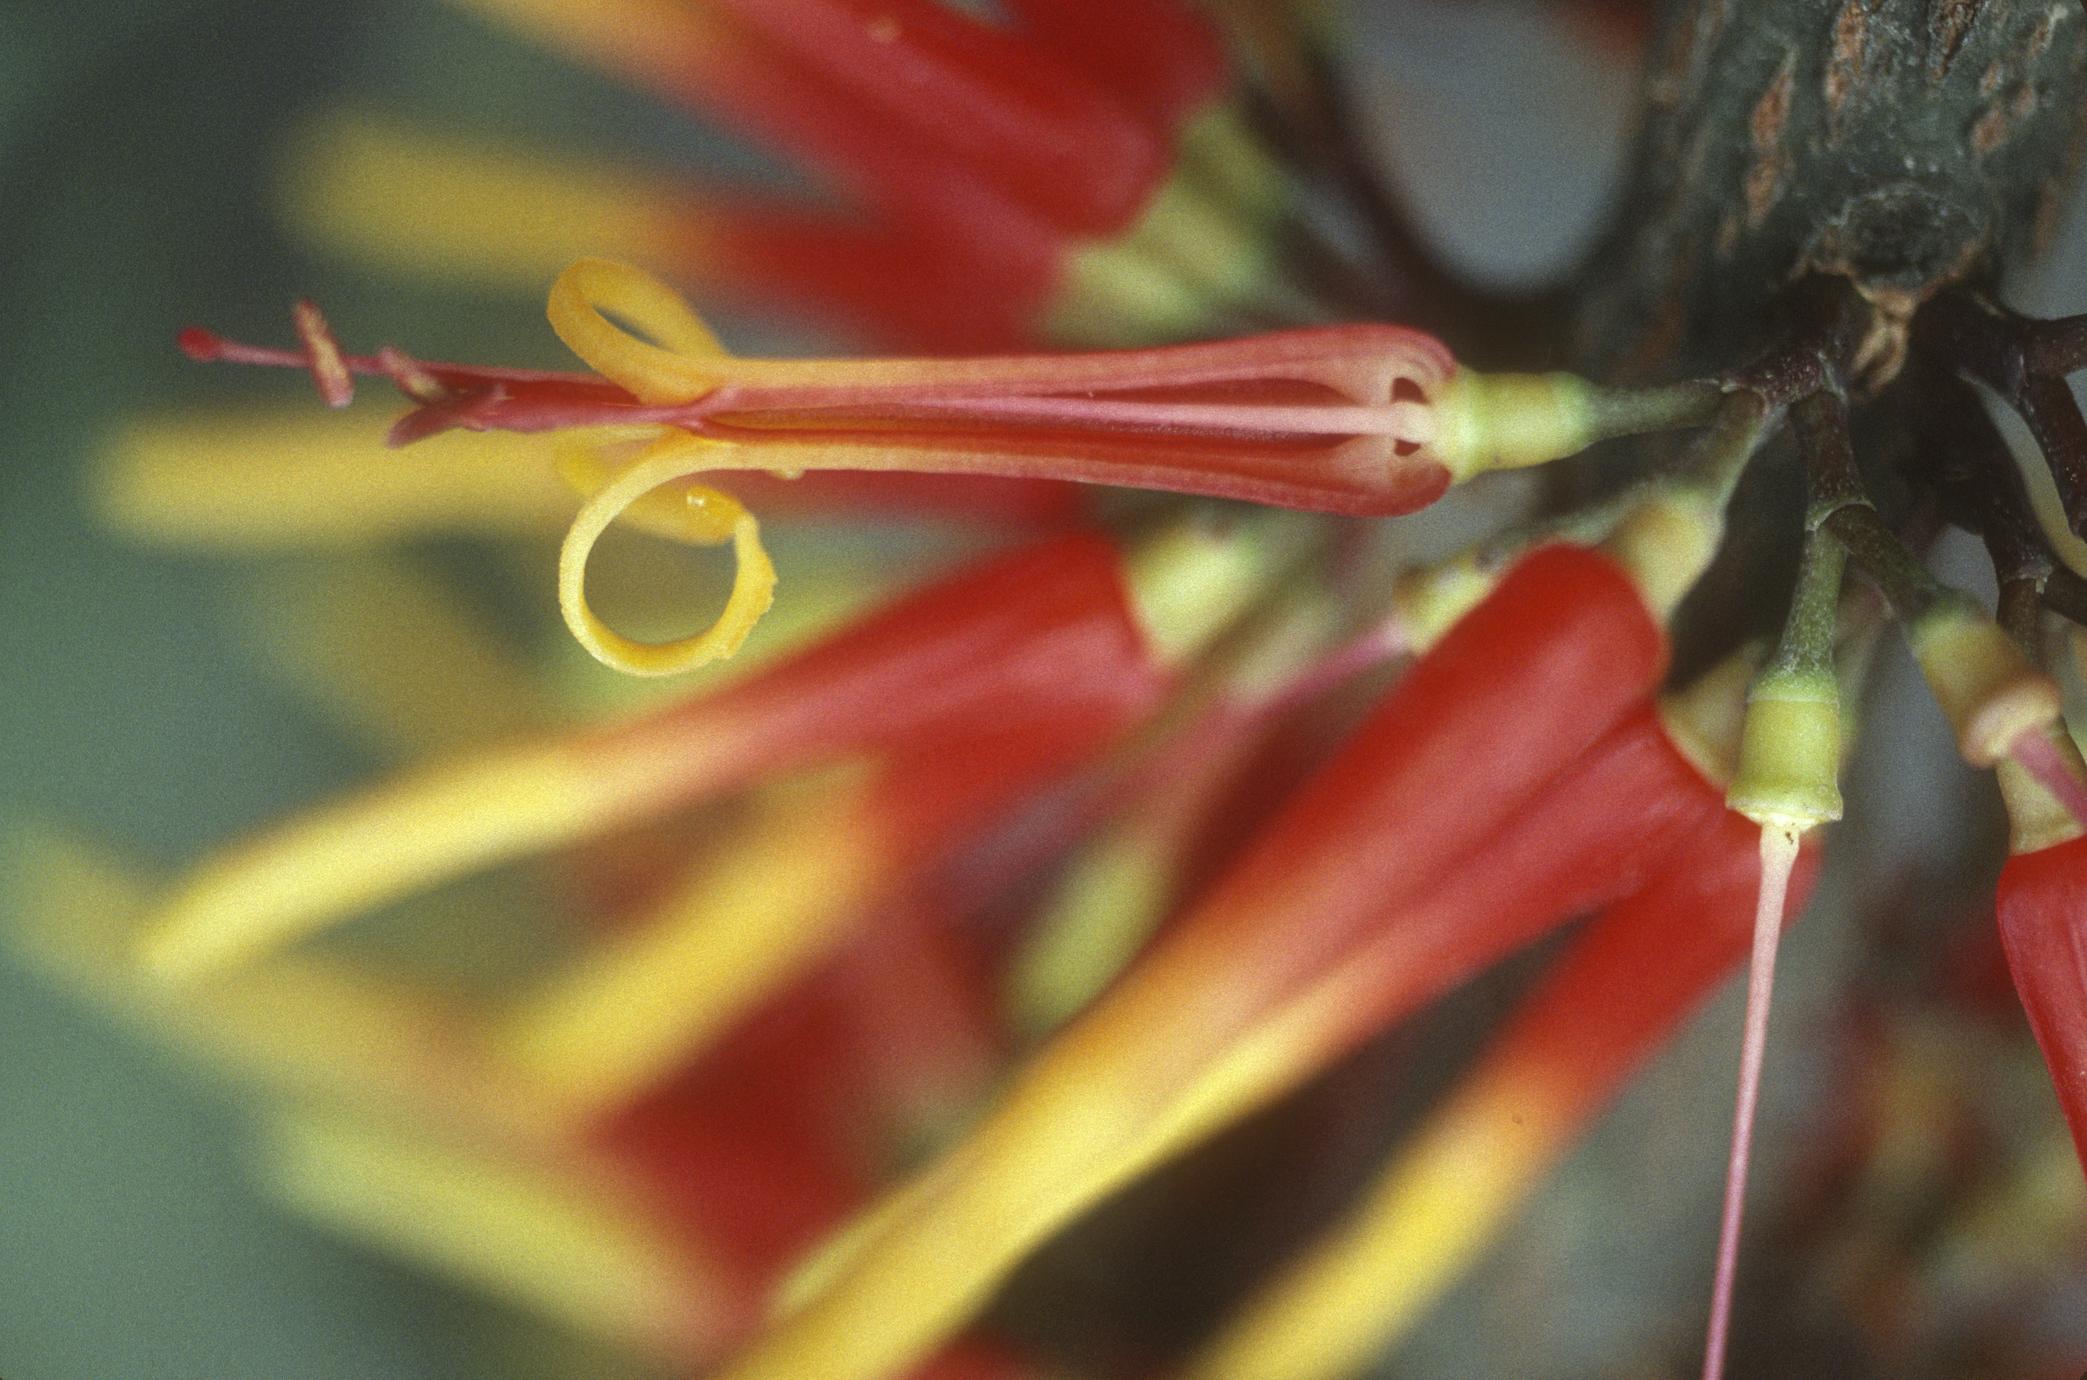 Psittacanthus, a parasite related to mistletoe, west of Autlán